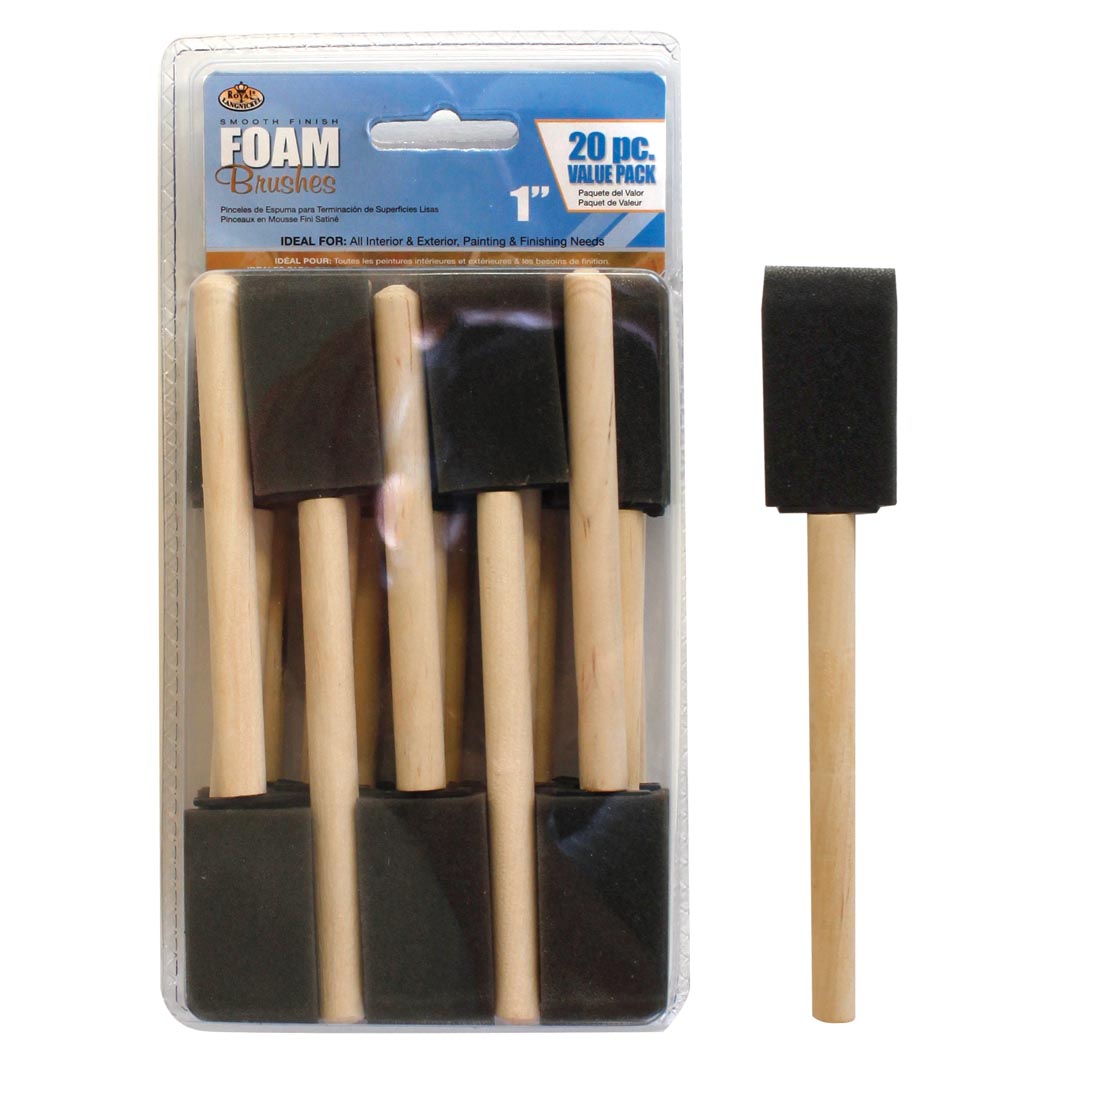 1" Foam Brushes with Wooden Handle - 20 Pack Royal Brush - image 1 of 2